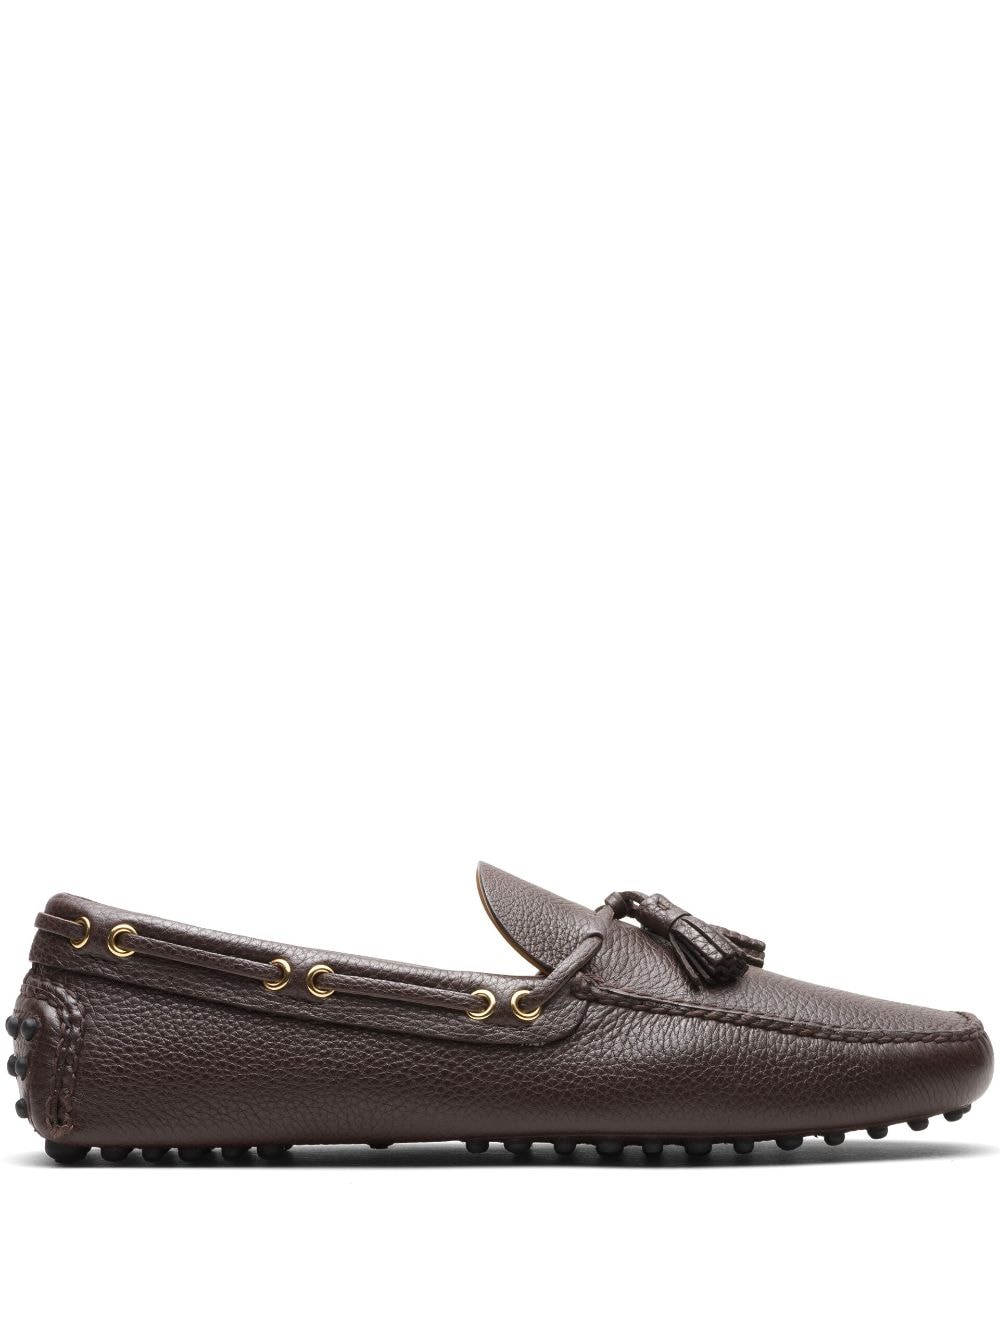 Car Shoe Tassel-detail Leather Boat Shoes In Brown